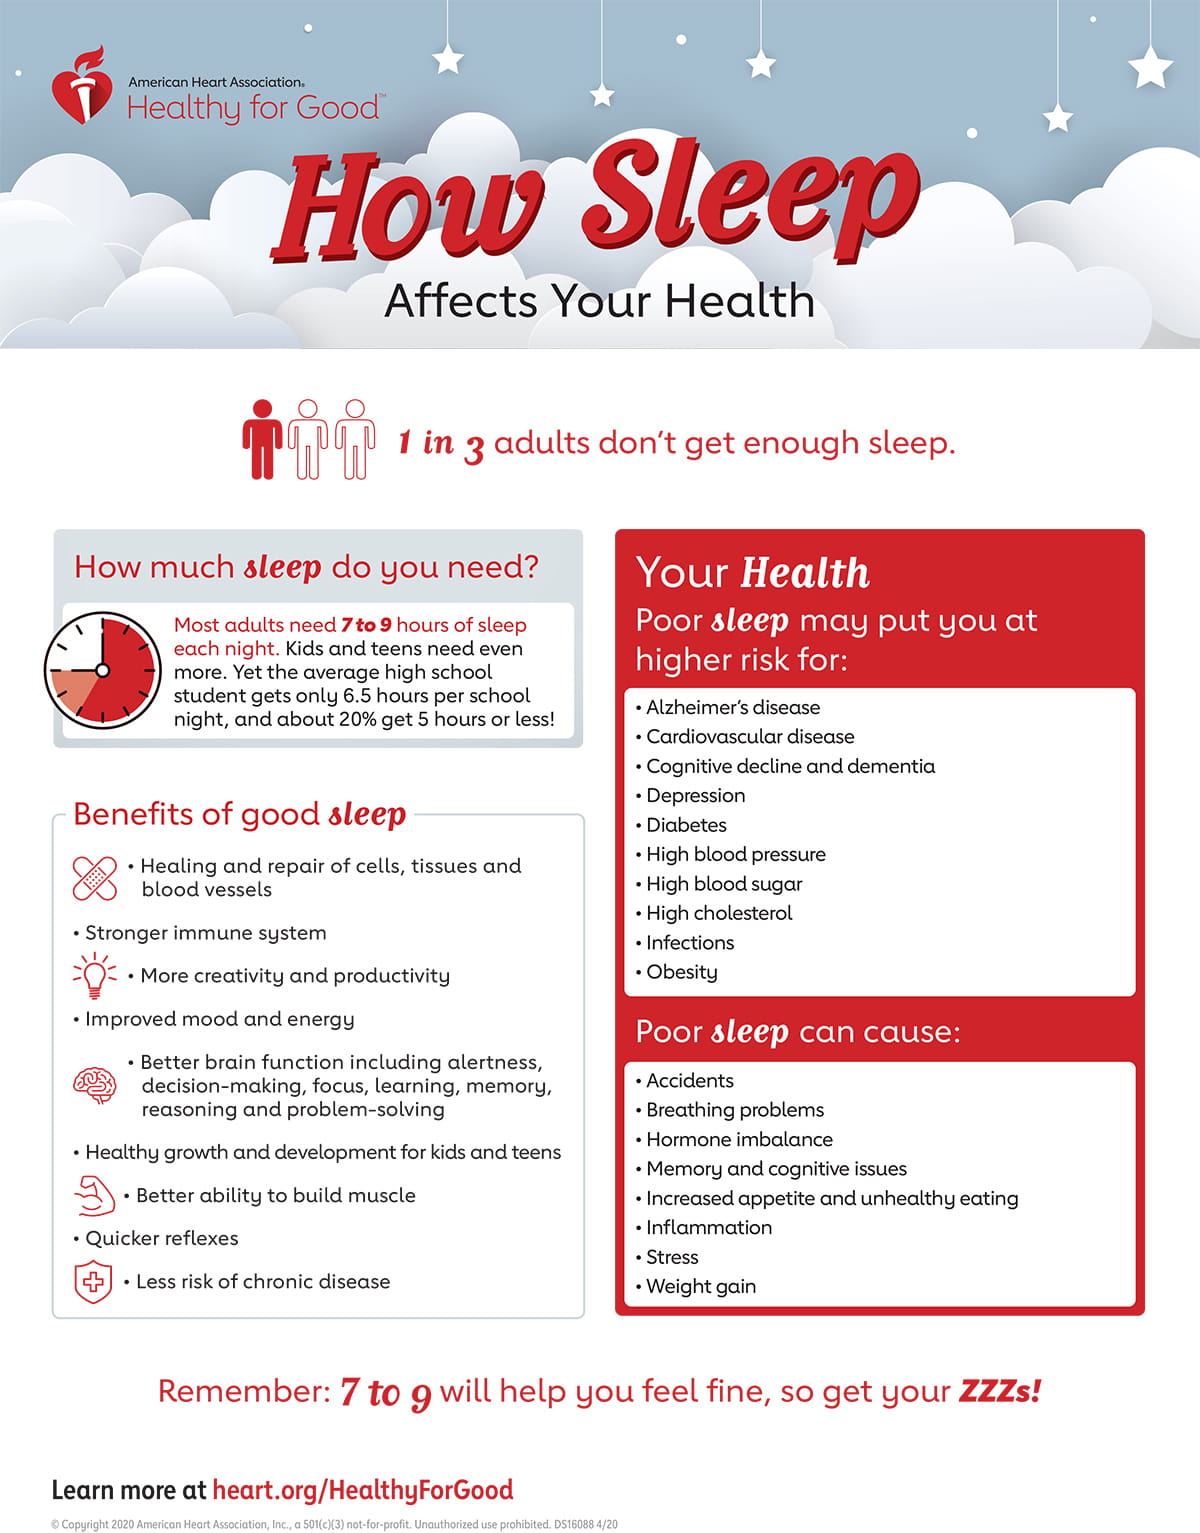 What impact does sleep have on a healthy lifestyle?